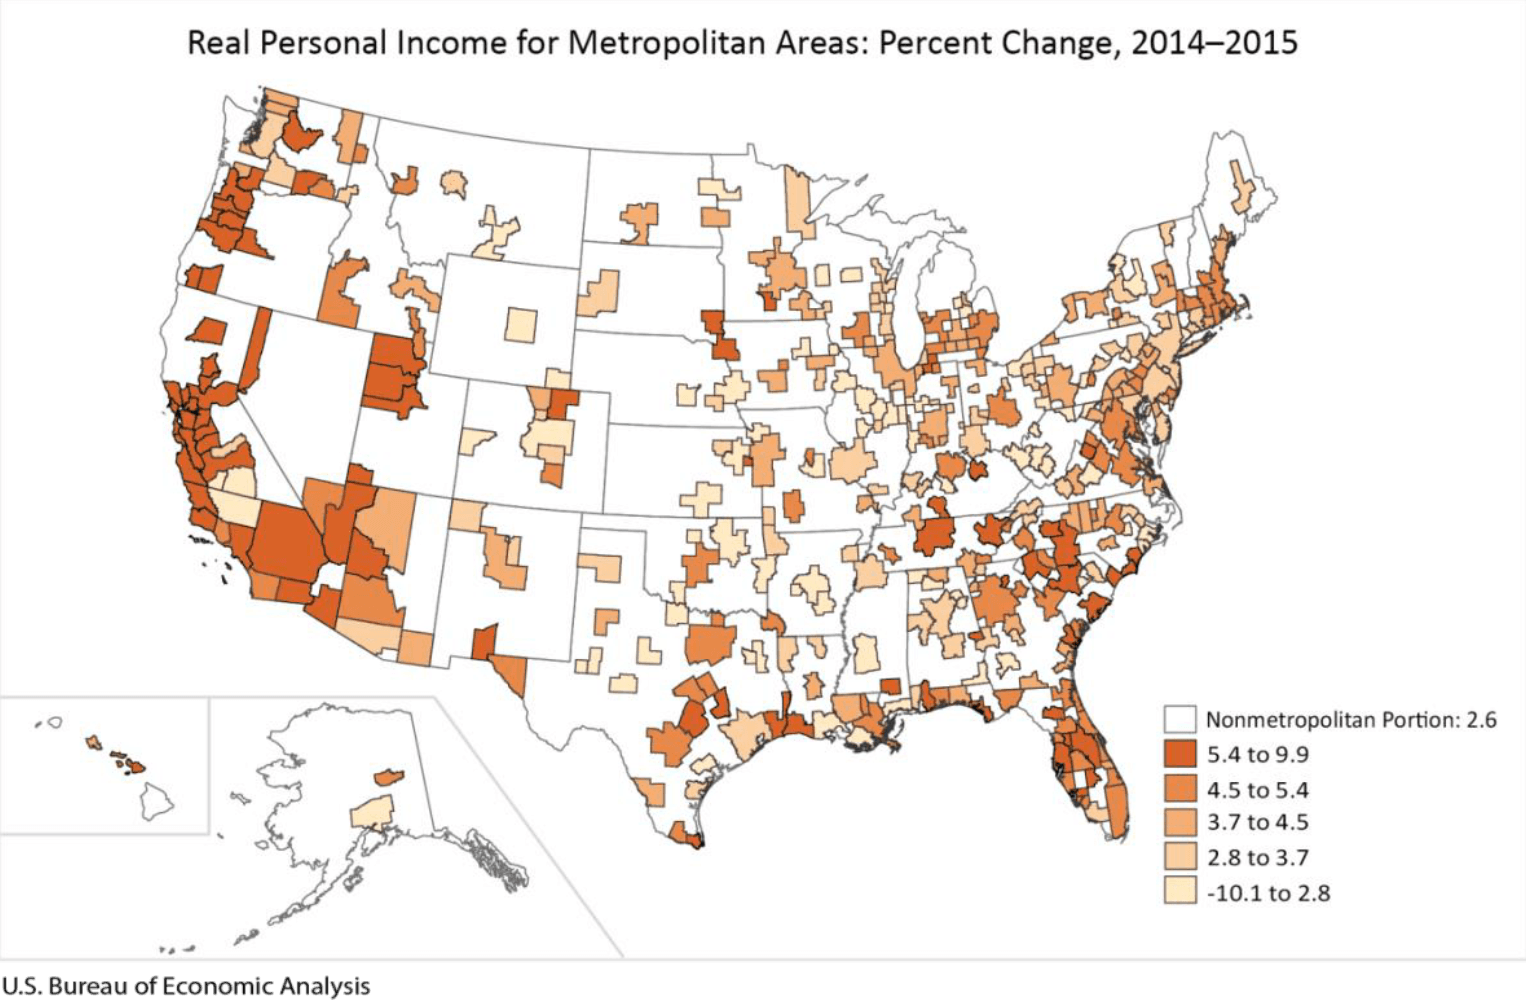 Real Personal Income for Metropolitan Areas: Percent Change, 2014-2015